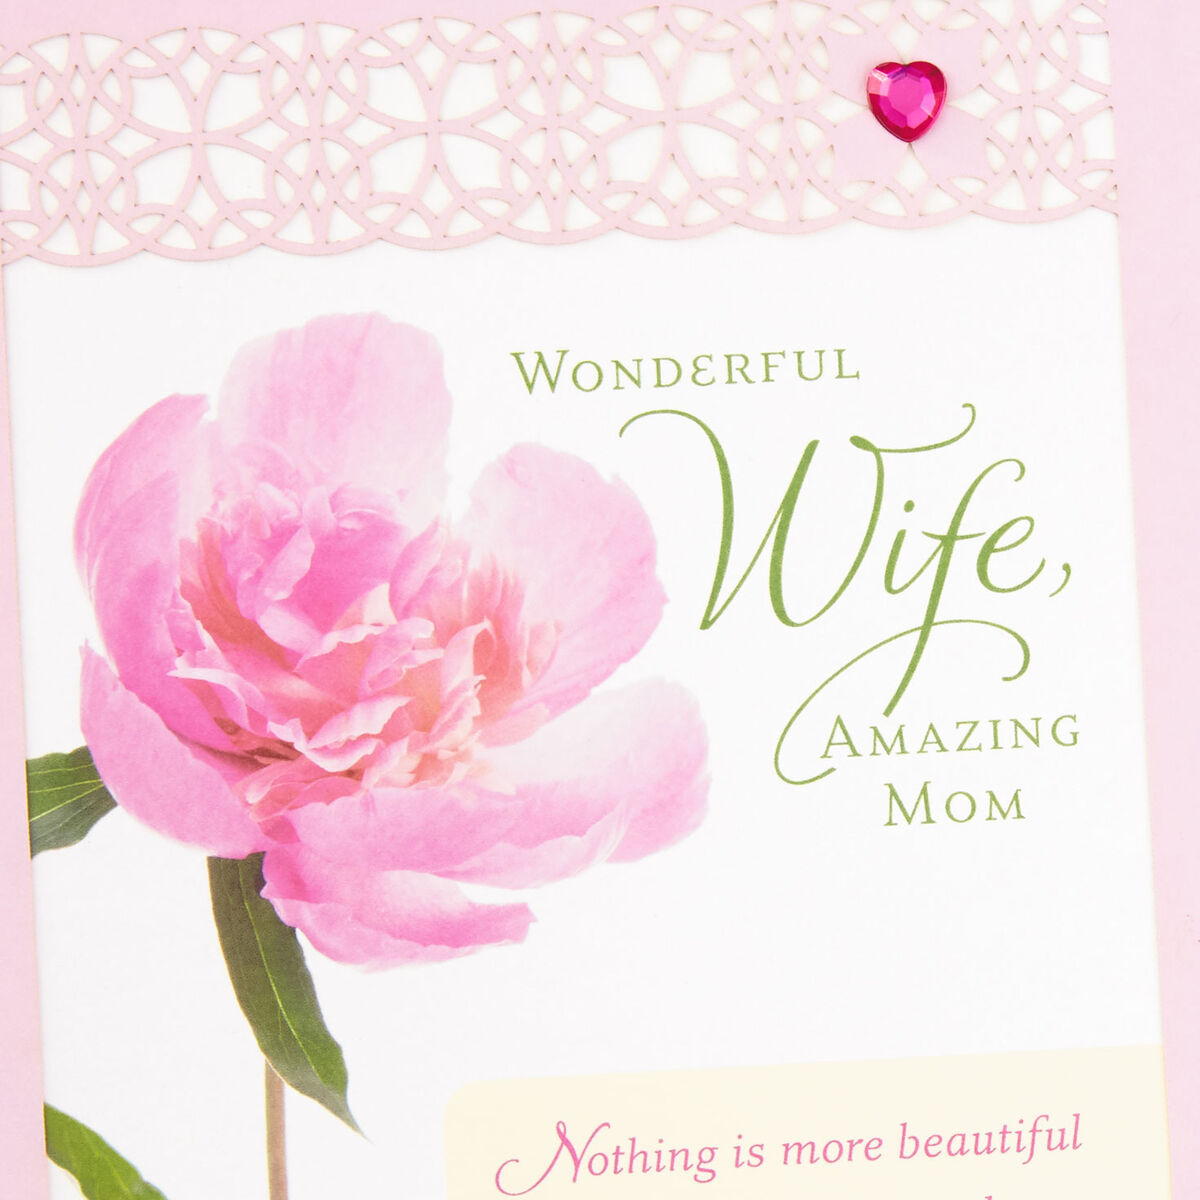 grateful-to-share-this-life-with-you-religious-mother-s-day-card-for